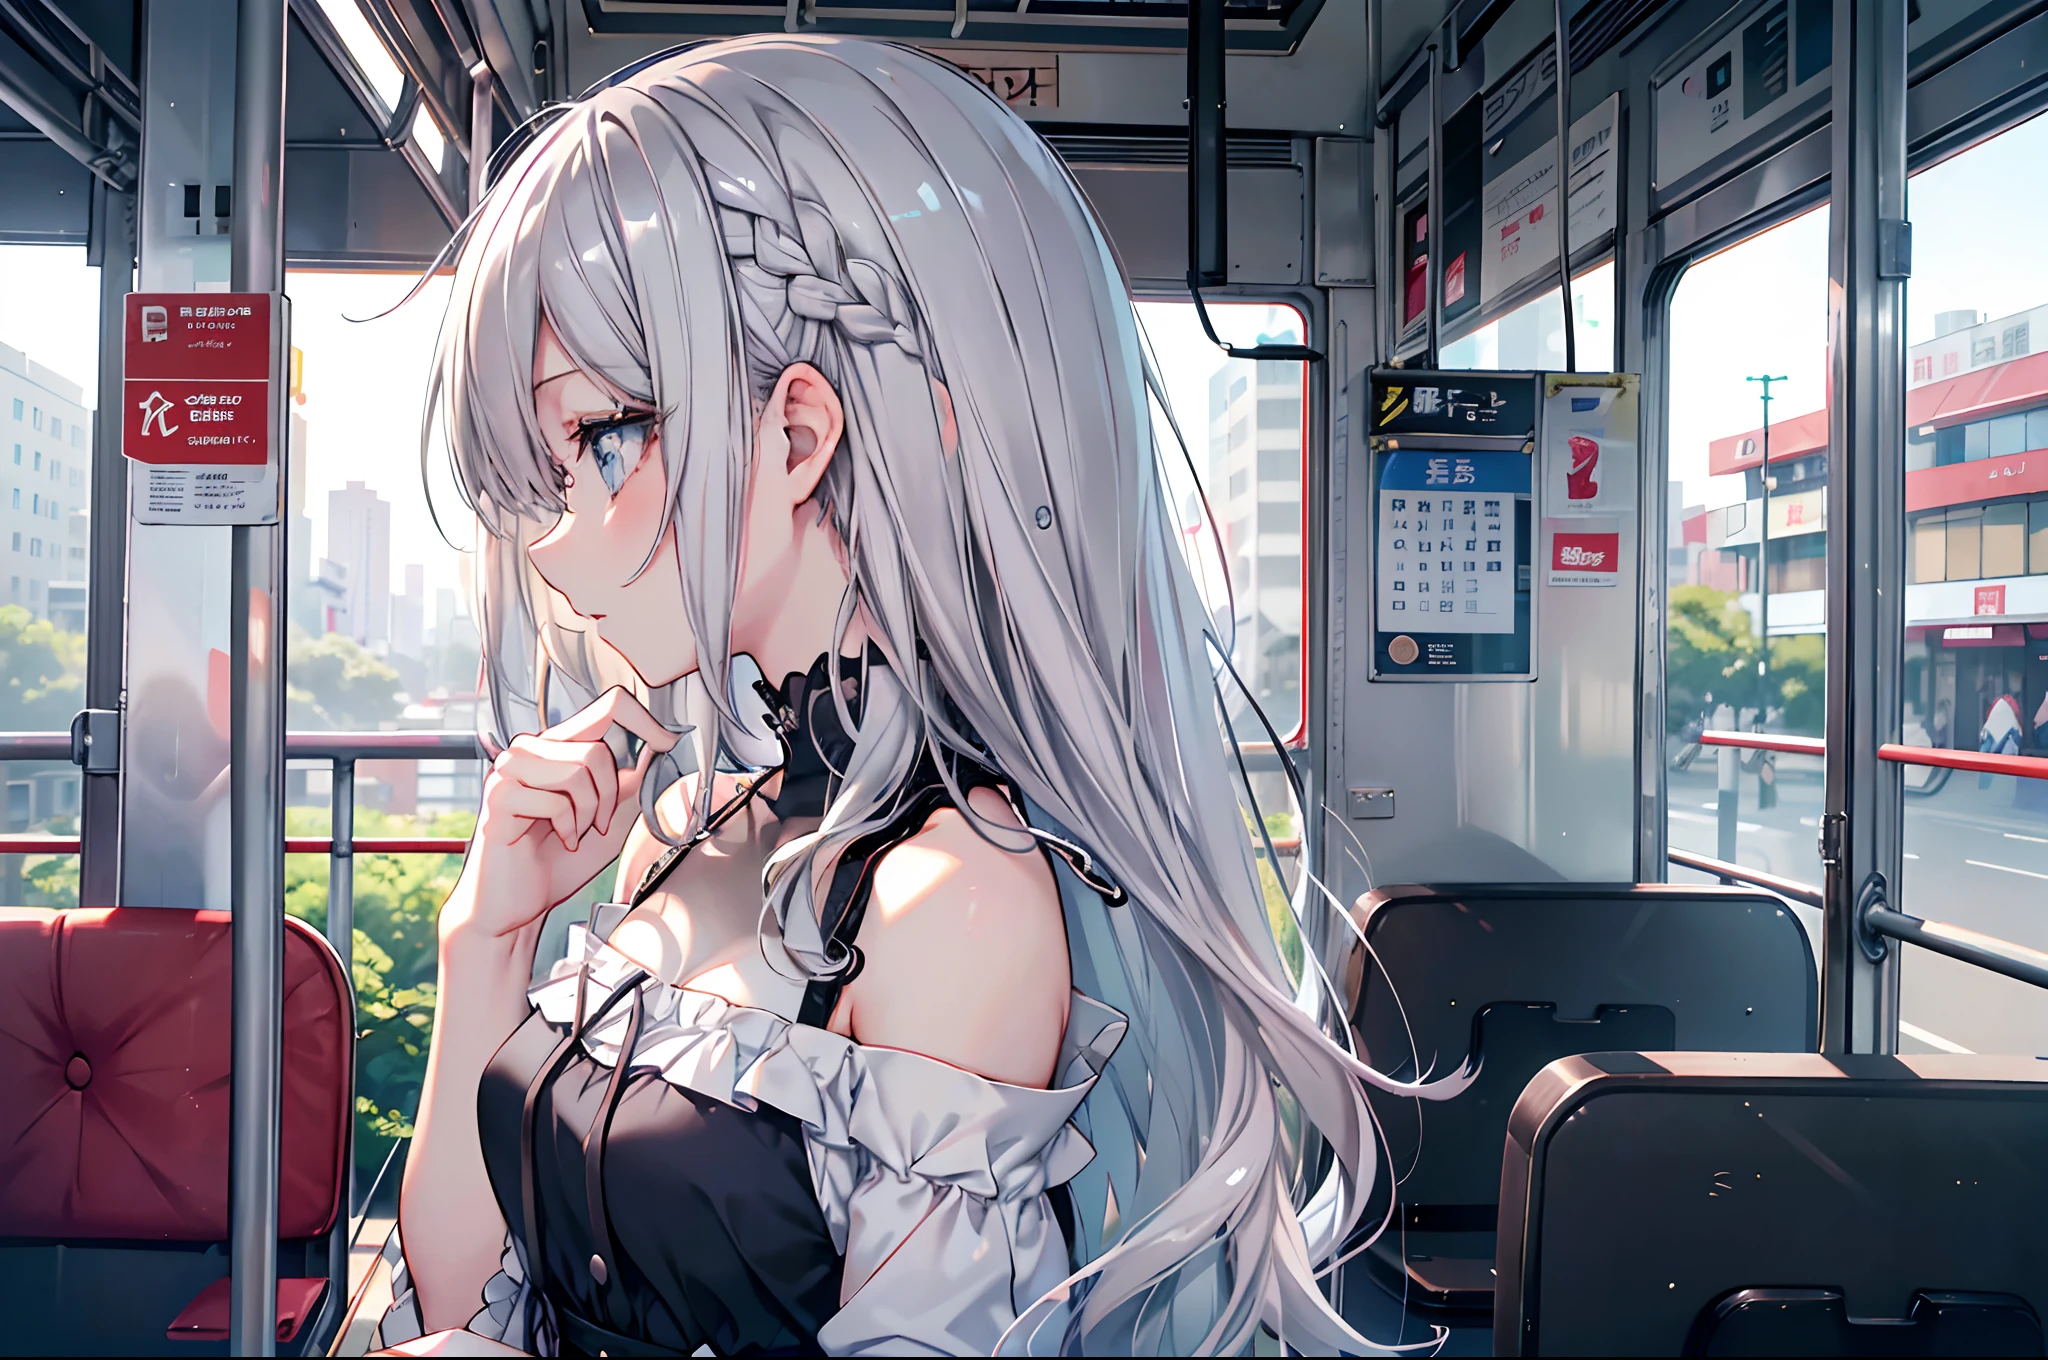 【Highest Quality, masutepiece】, (girl, stylish clothing, bare shoulders, Gray ash hair, Silver blue eyes, profile  Long Wavey Hair, Detailed eyes, details hands, hold a diary), (out of bus, asian market,morning, Look around)